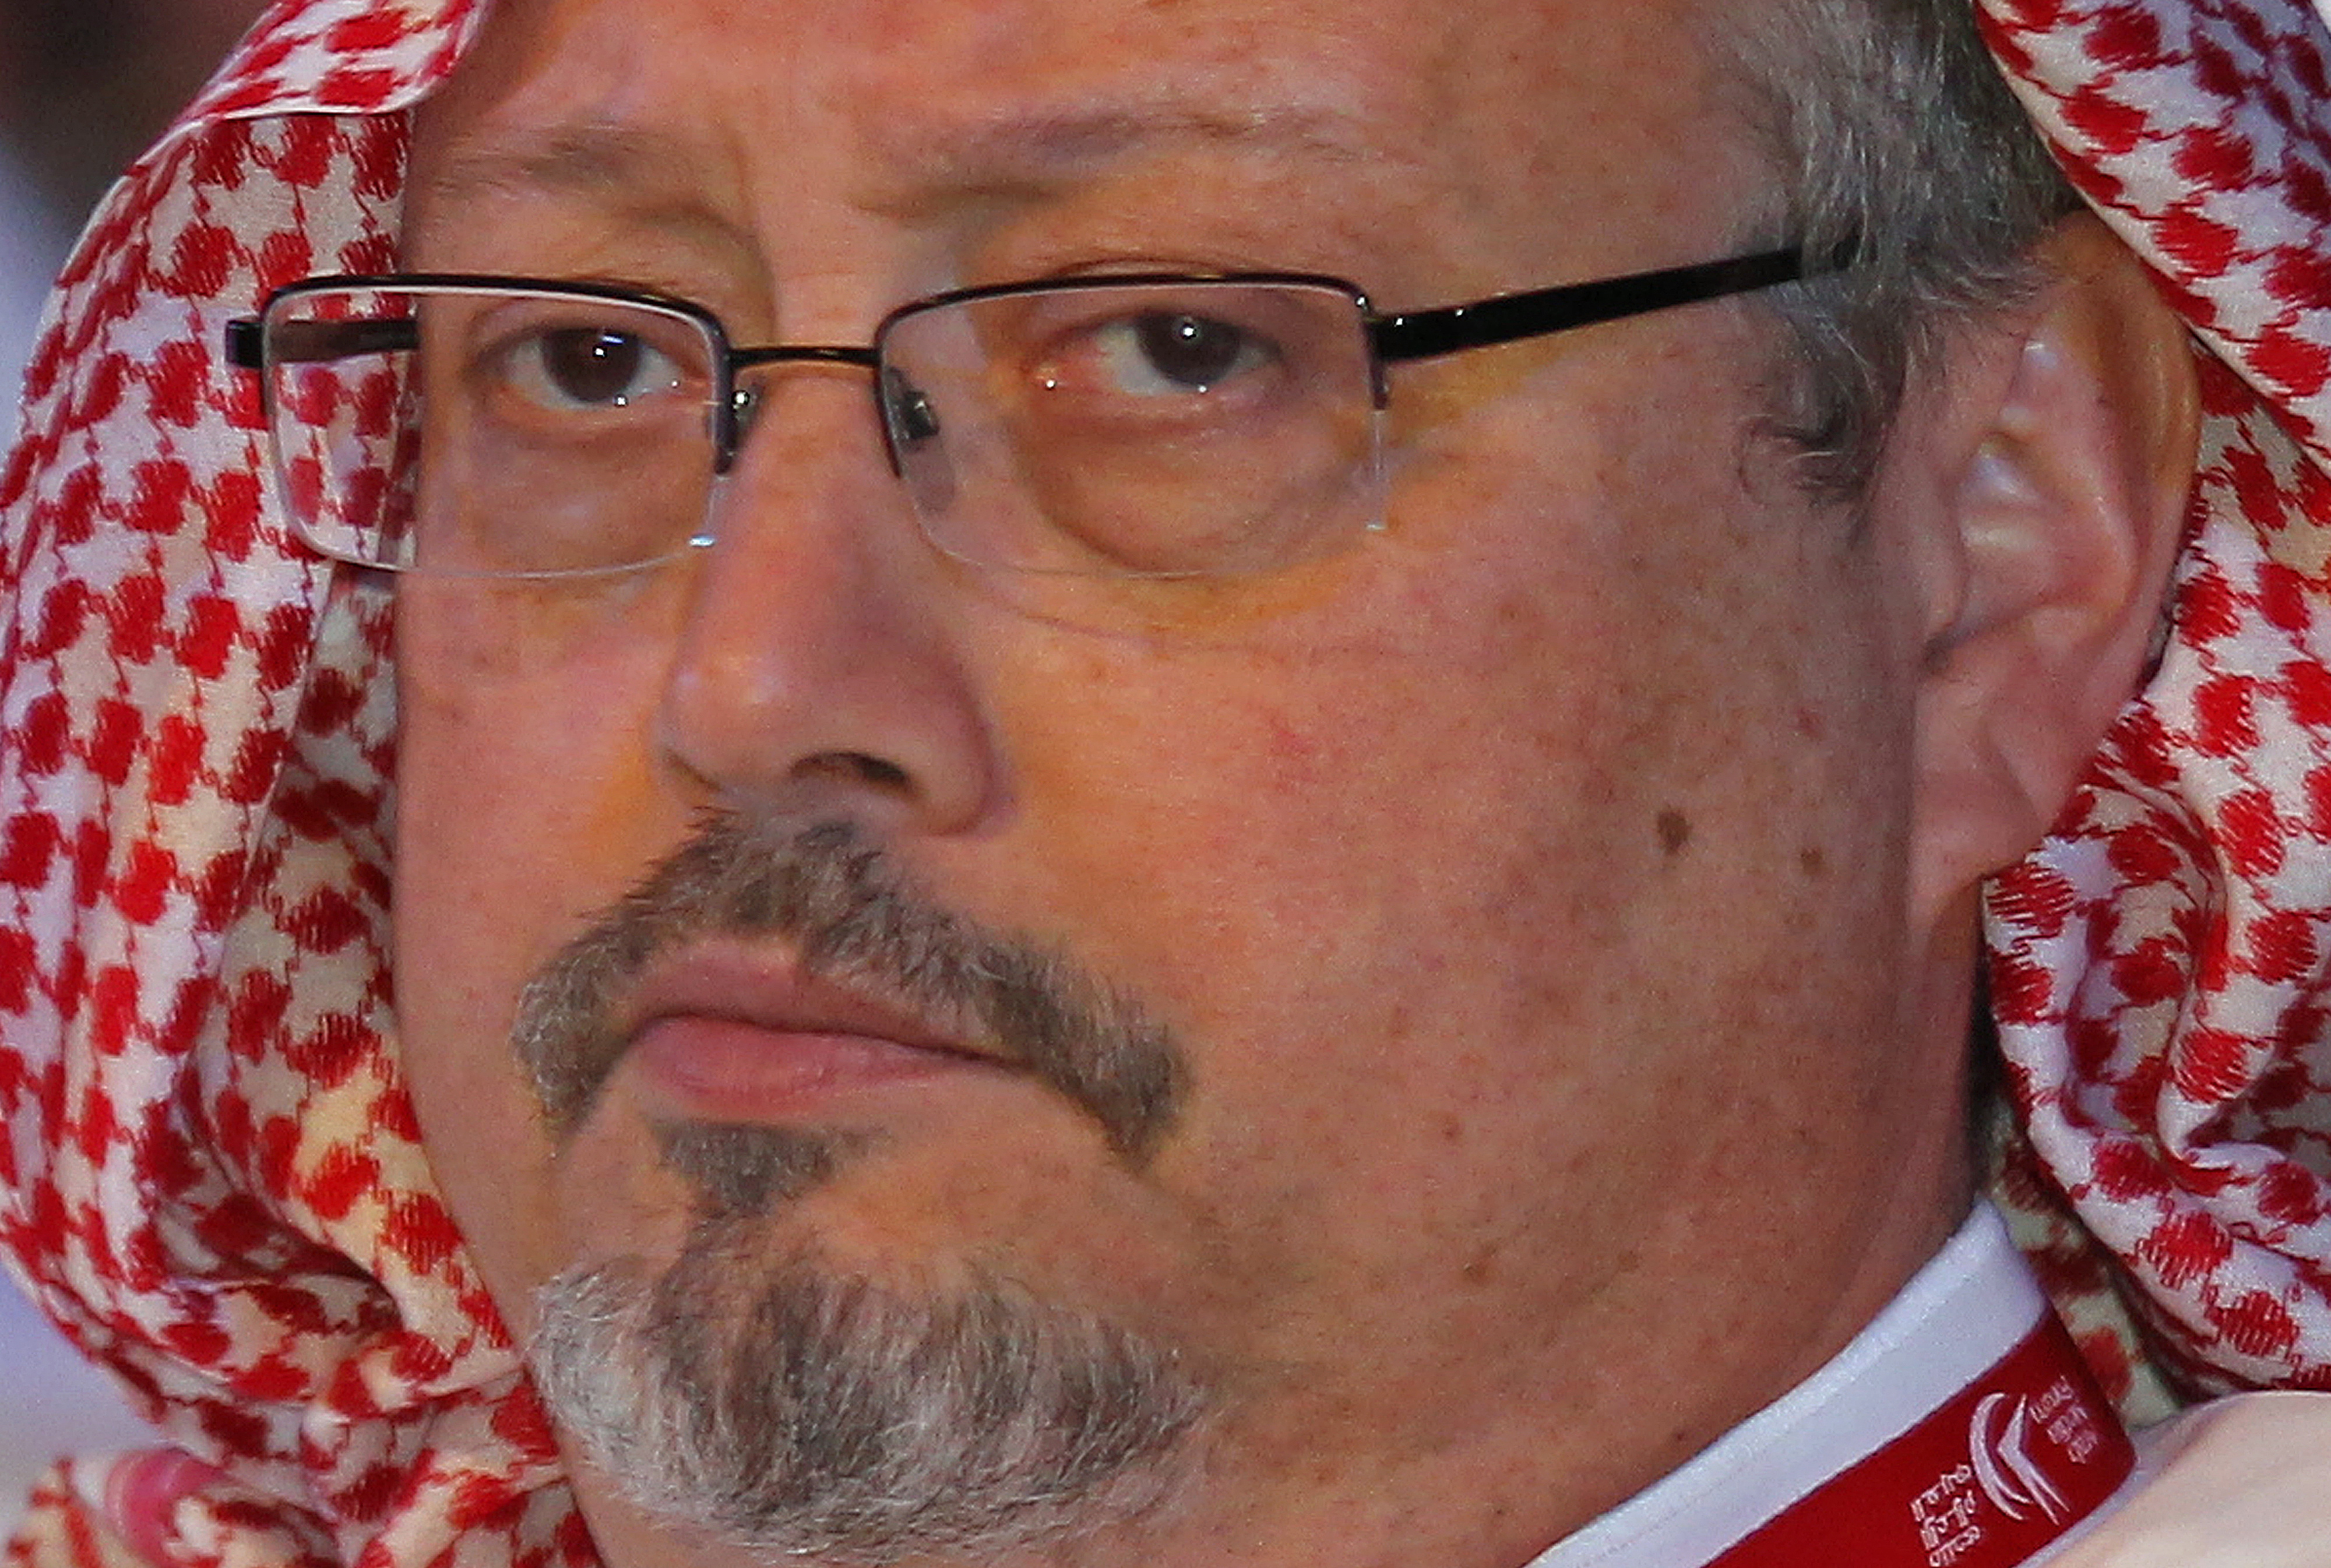 epa07105960 (FILE) - Saudi journalist and former editor-in-chief of the Saudi newspaper Al-Watan Jamal Khashoggi attends the the opening ceremony of 11th edition of Arab Media Forum 2012 in Dubai, United Arab Emirates, 08 May 2012 (issued 19 October 2018). According to reports, Saudi state television on 19 October says that missing journliast Jamal Khashoggi died in the Saudi consulate in Istanbul, Turkey following a fight. Khashoggi disappeared after visiting the Saudi consulate in Istanbul on 02 October 2018 to complete routine paperwork.  EPA/ALI HAIDER *** Local Caption *** 54673034